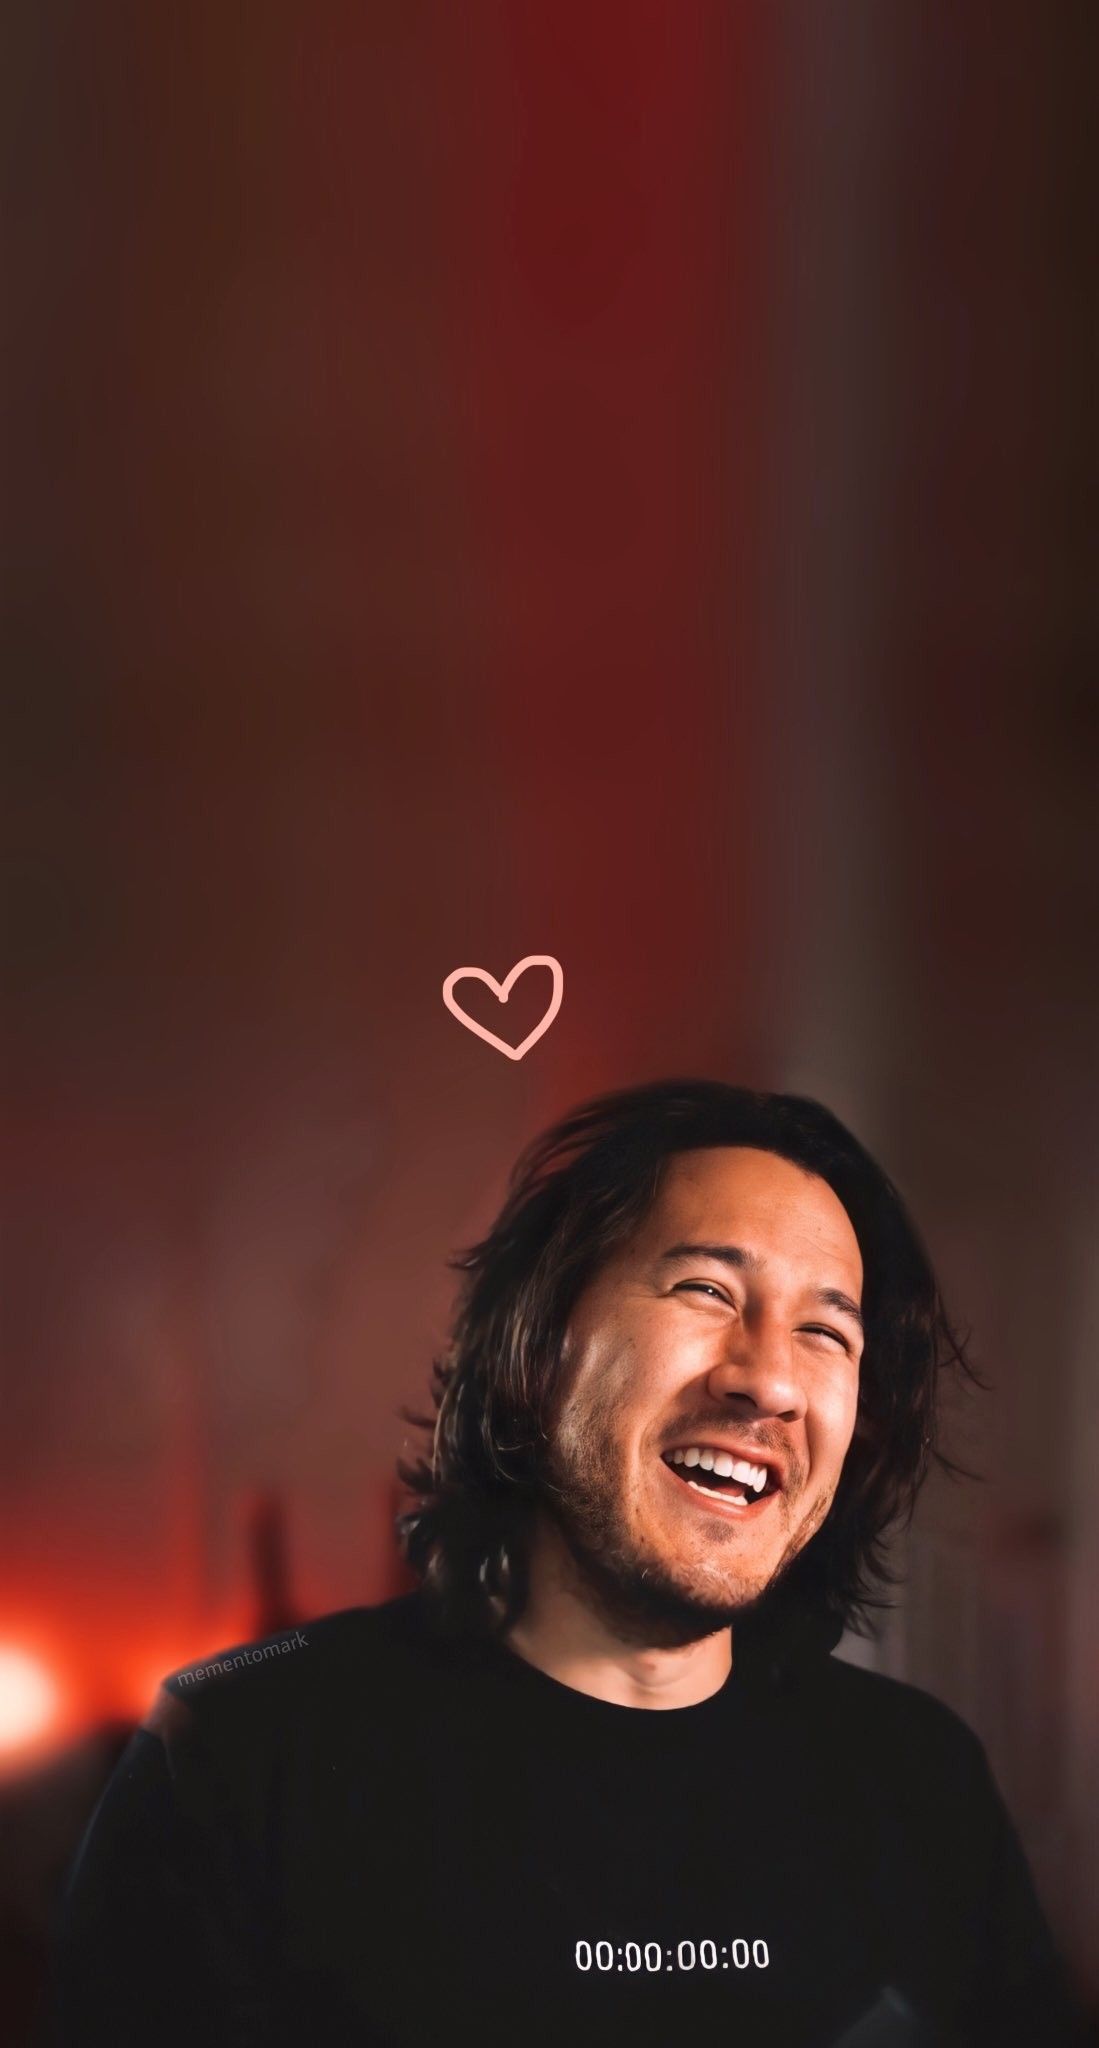 Aesthetic background of a man with a heart above his head - Markiplier